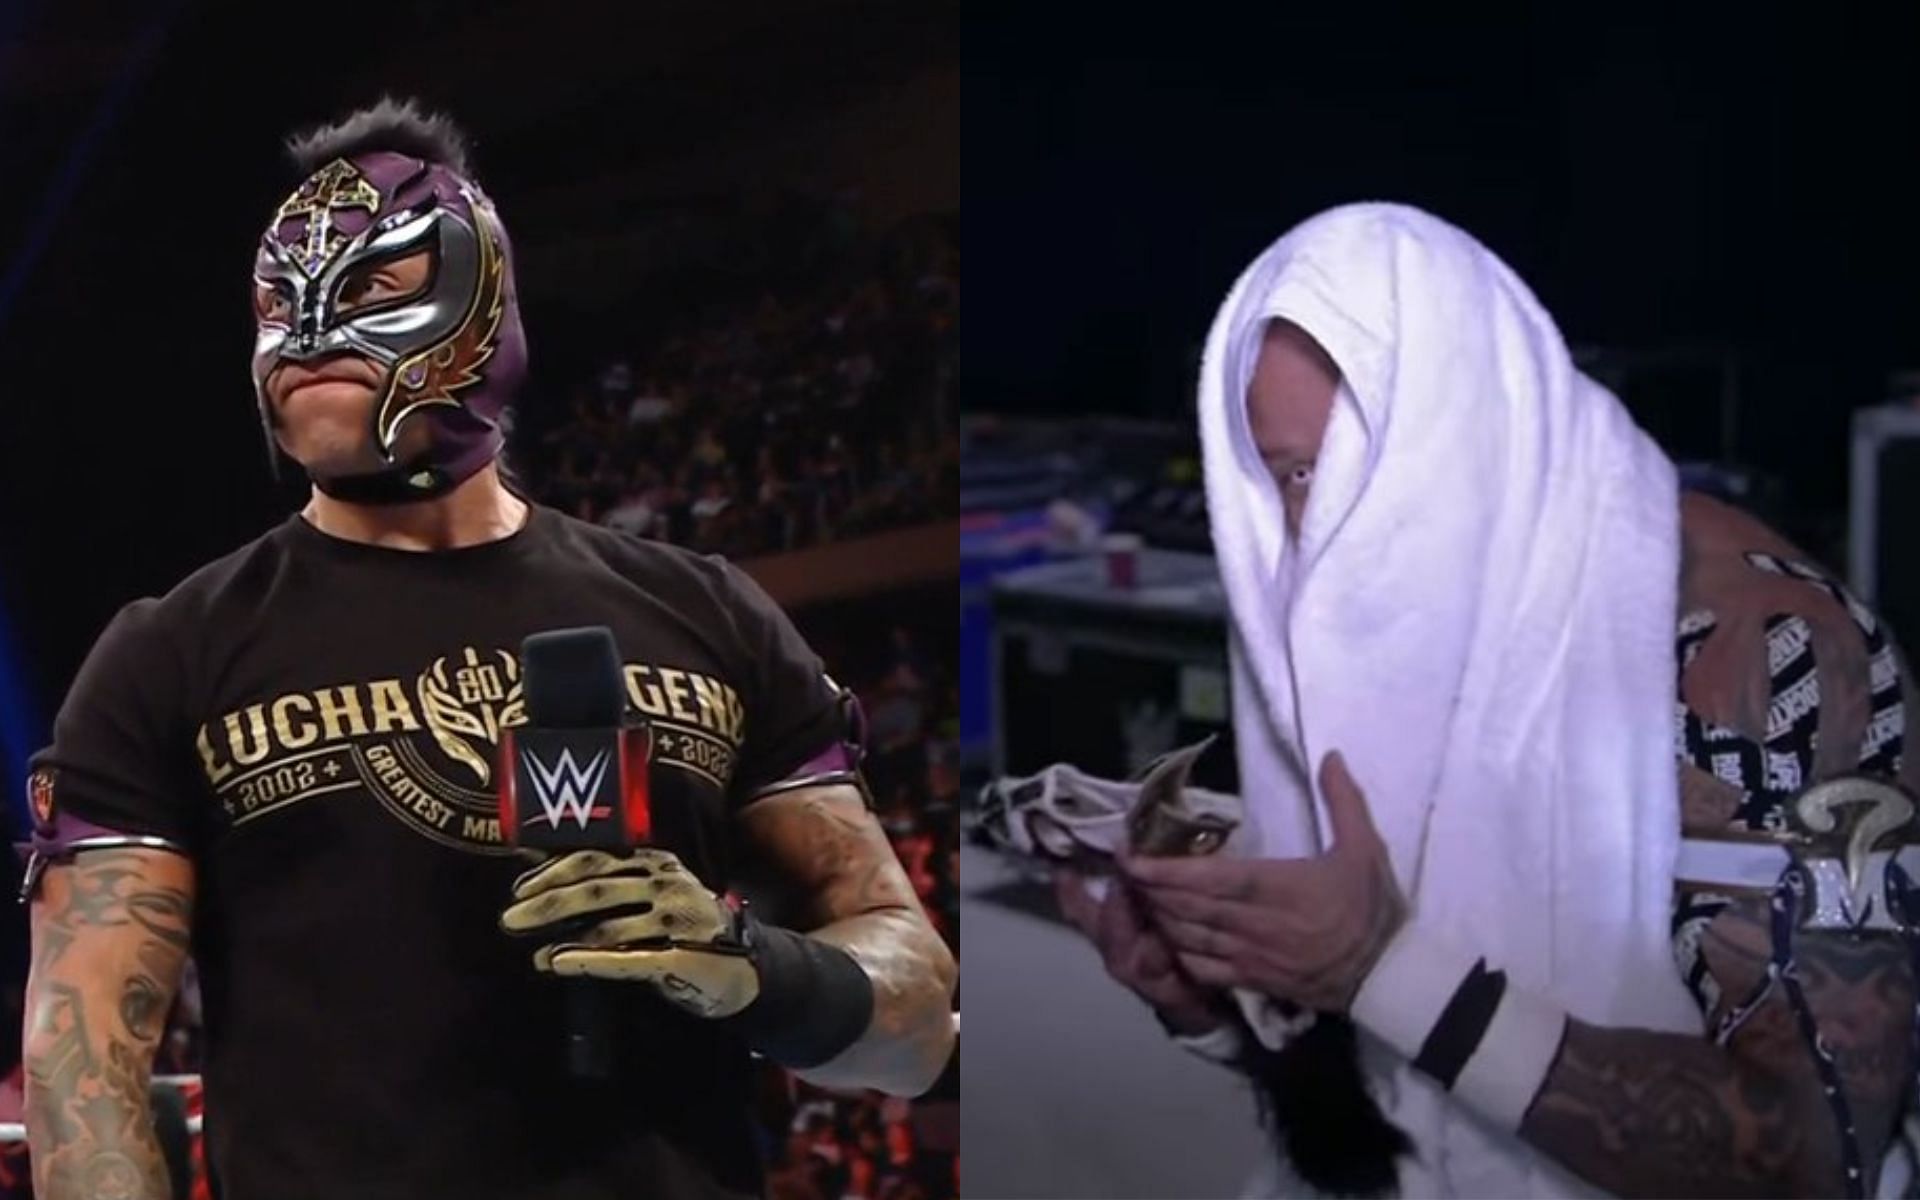 WWE Legend Rey Mysterio without his mask